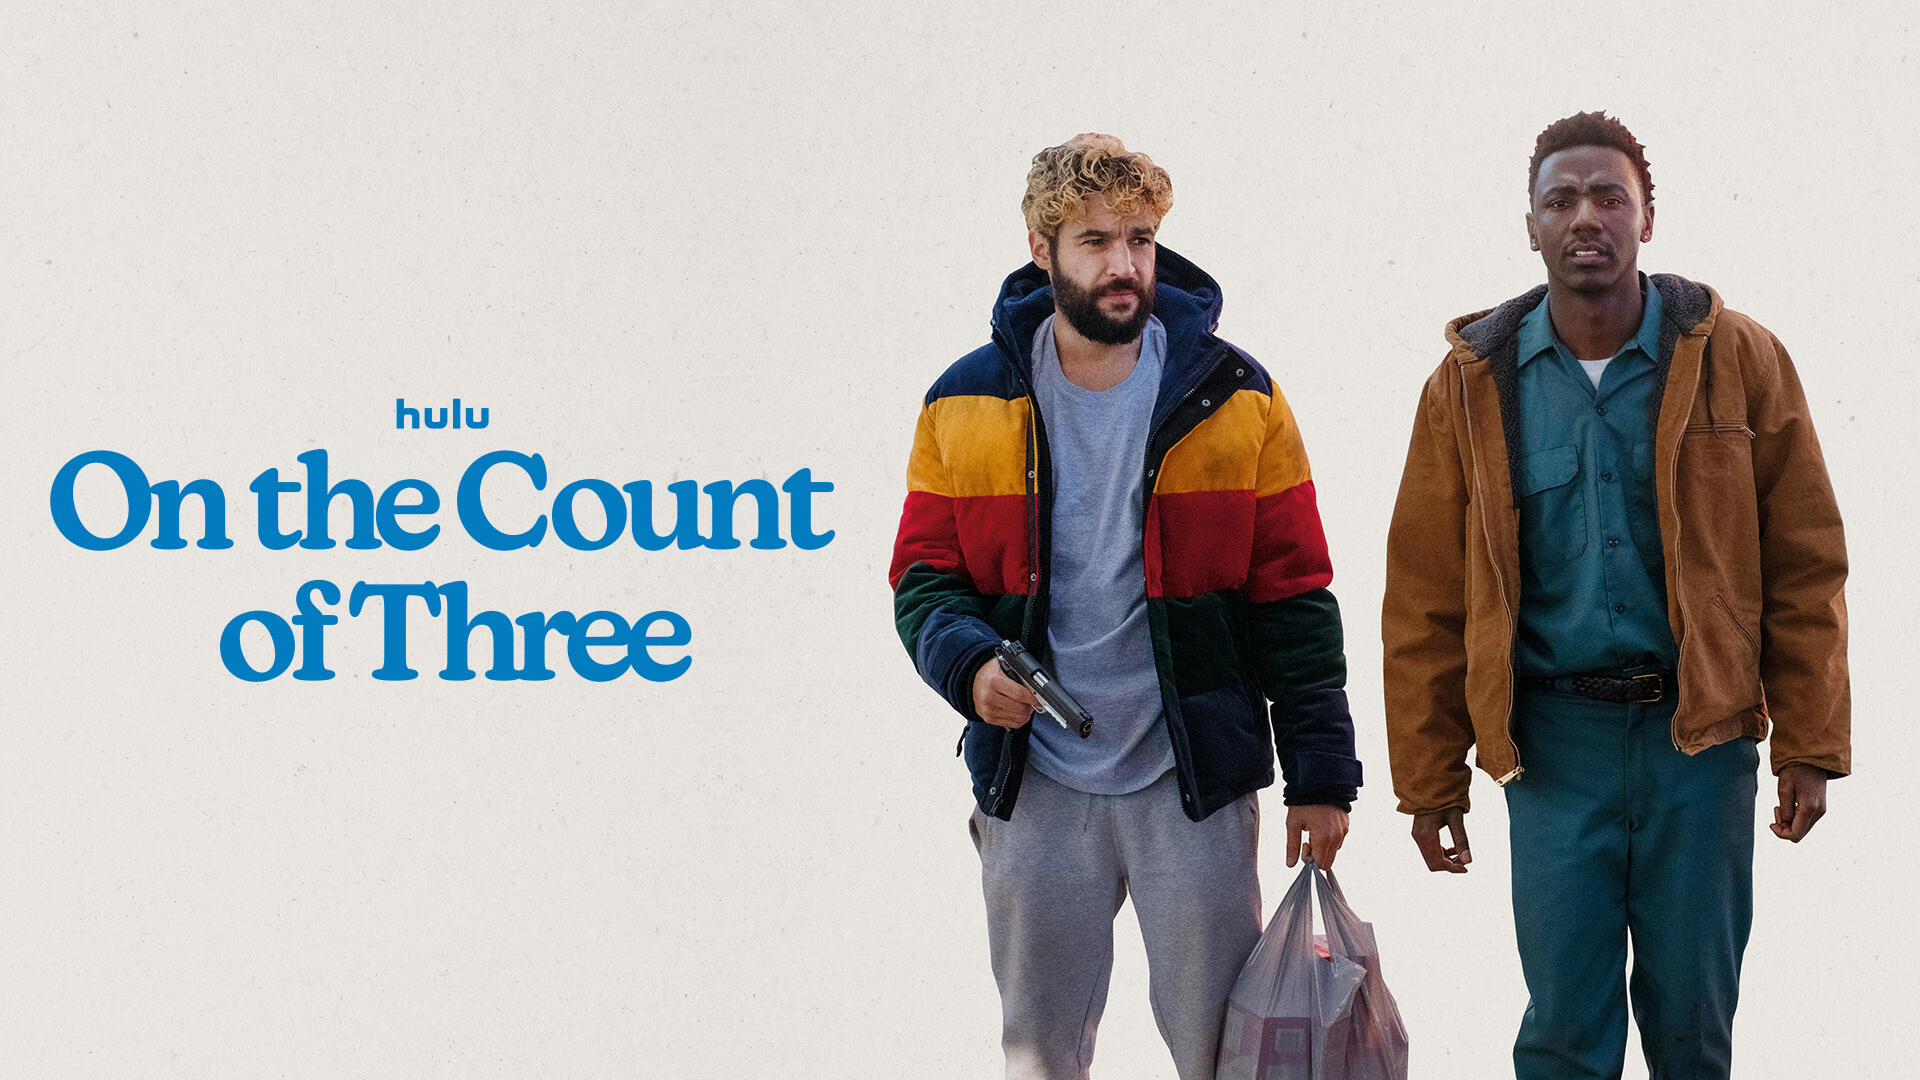 On the Count of Three -- Jerrod Carmichael makes his directorial debut and stars in “On the Count of Three,” a darkly comic feature about two best friends, Val (Carmichael) and Kevin (Christopher Abbott), on the last day of their lives. Val (Jerrod Carmichael) and Kevin (Christopher Abbott), shown. (Photo courtesy of Annapurna Pictures and Orion Pictures)